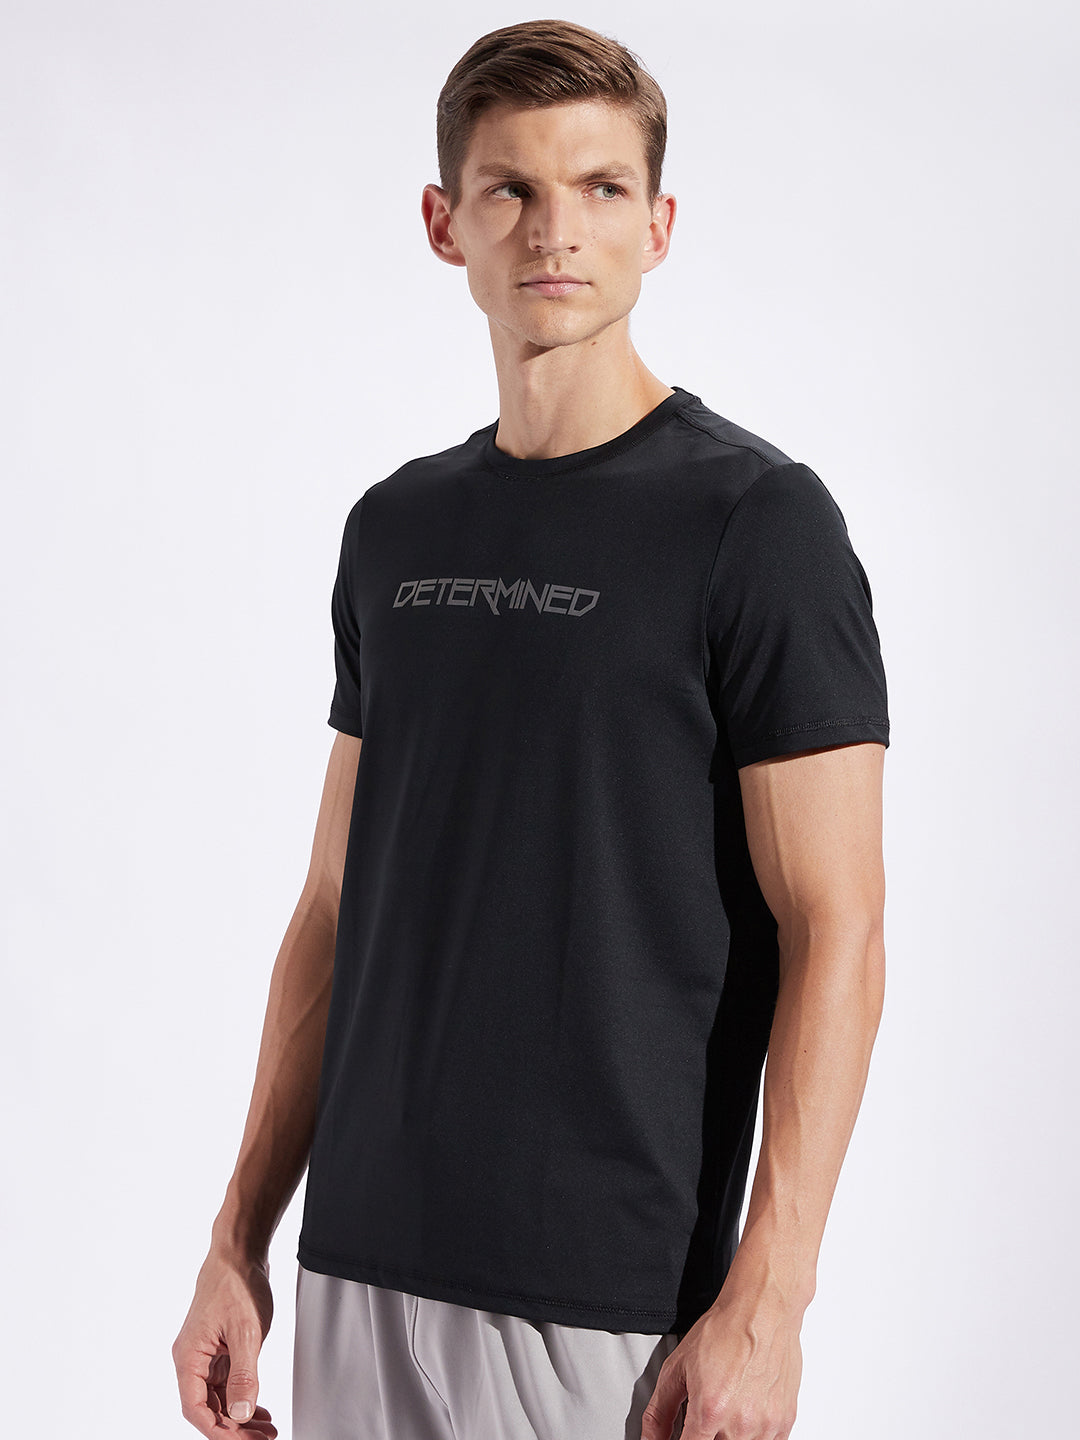 Determined Stretchable T-shirt 1